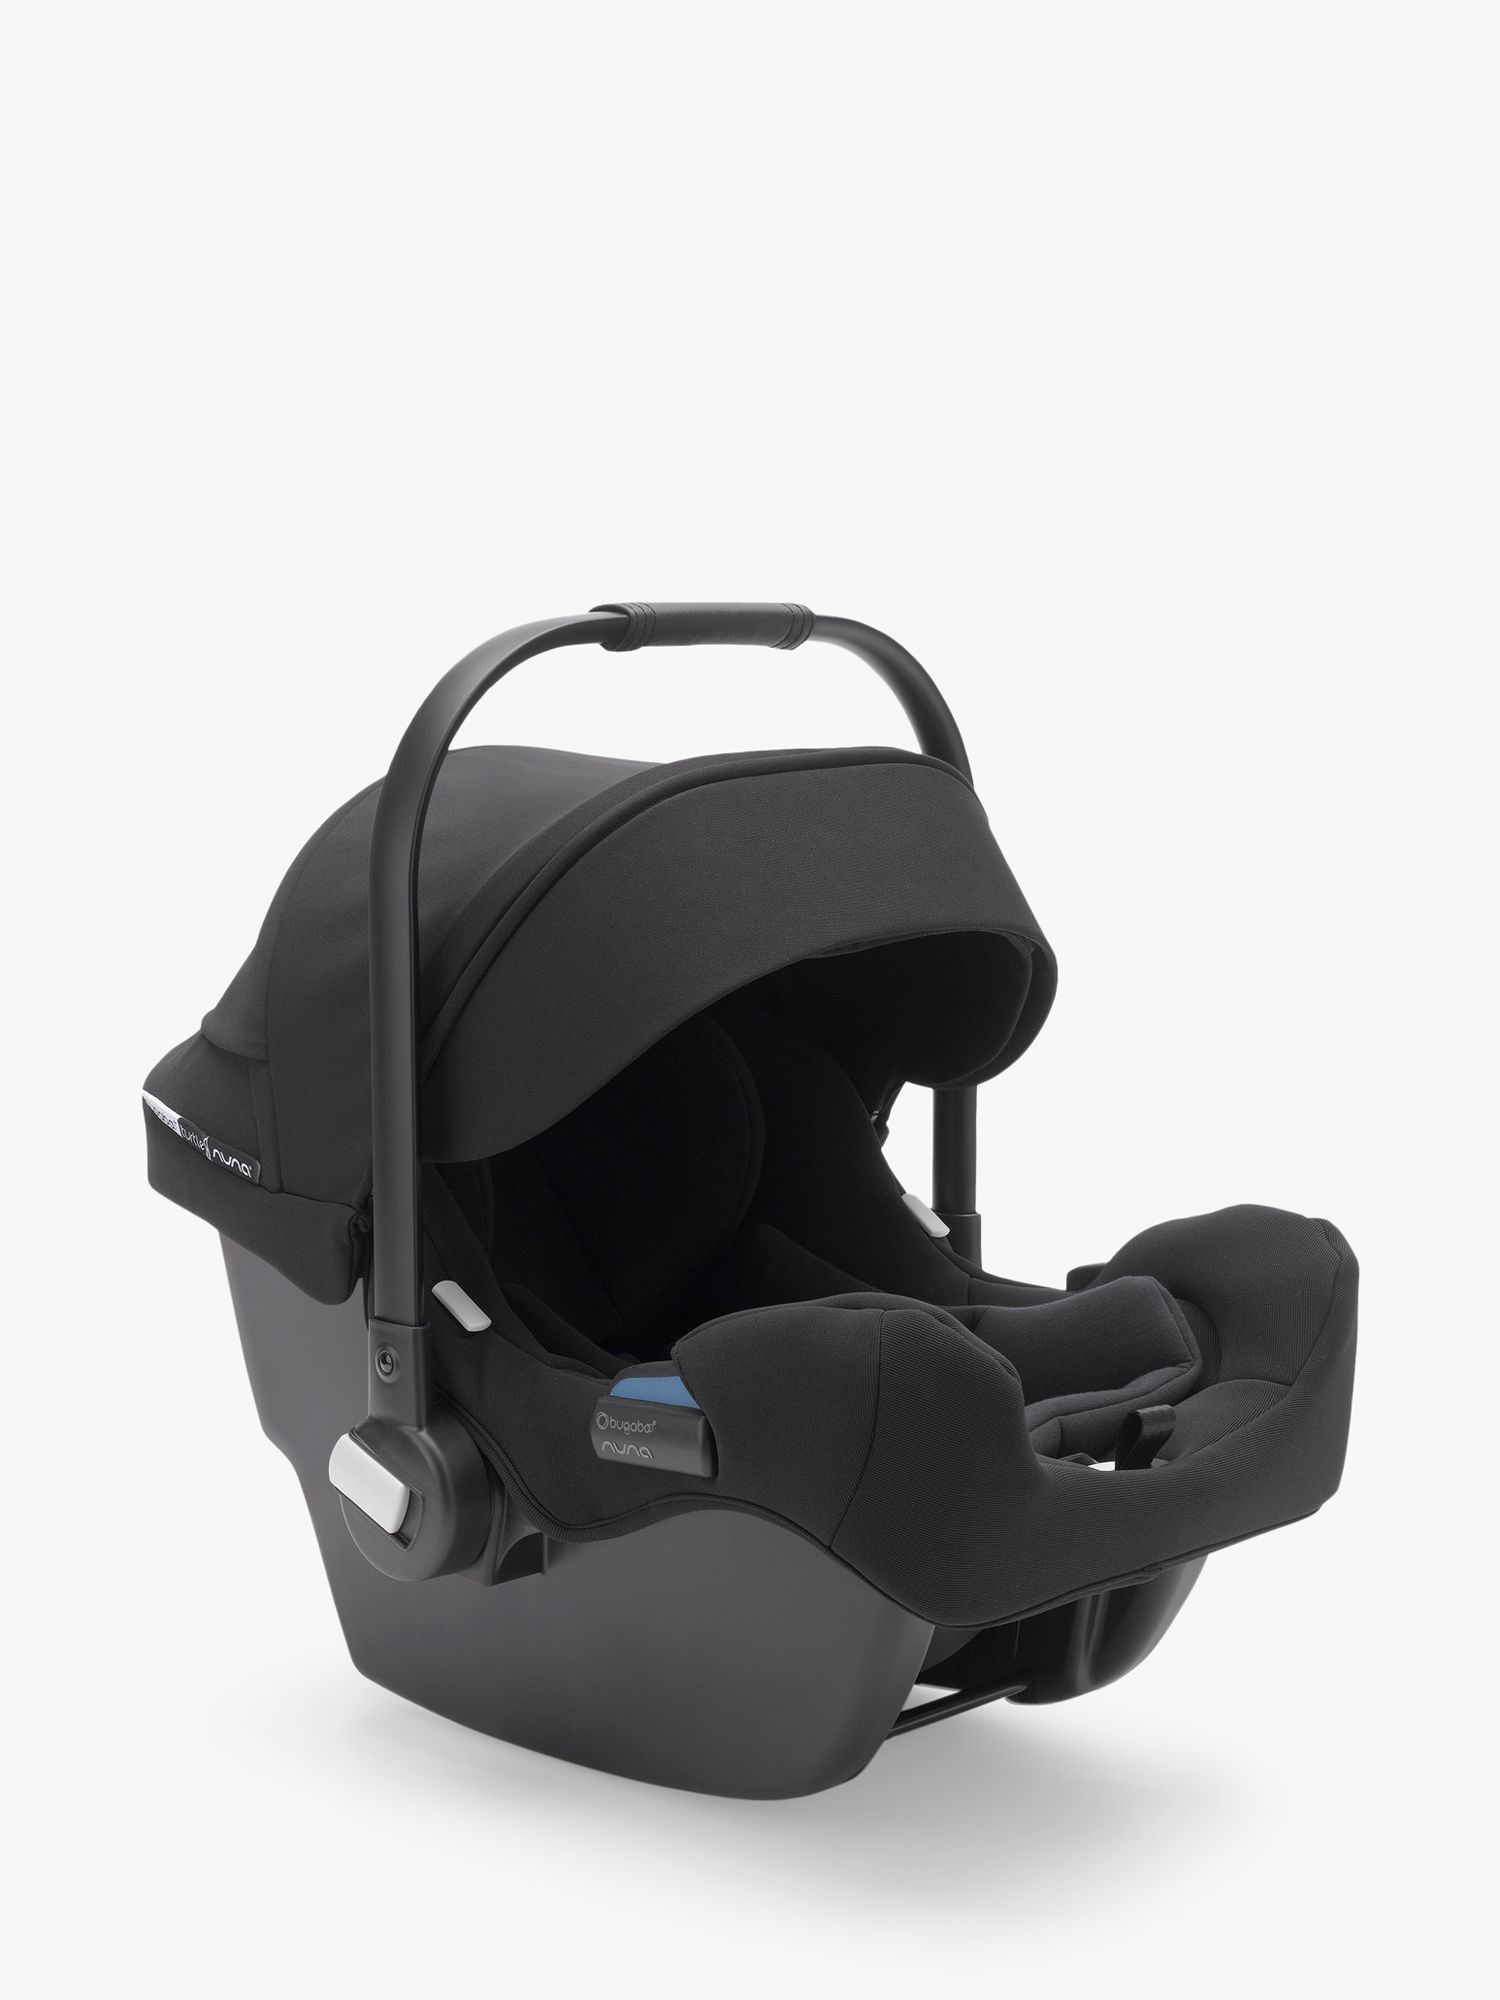 bugaboo bee car seat compatibility